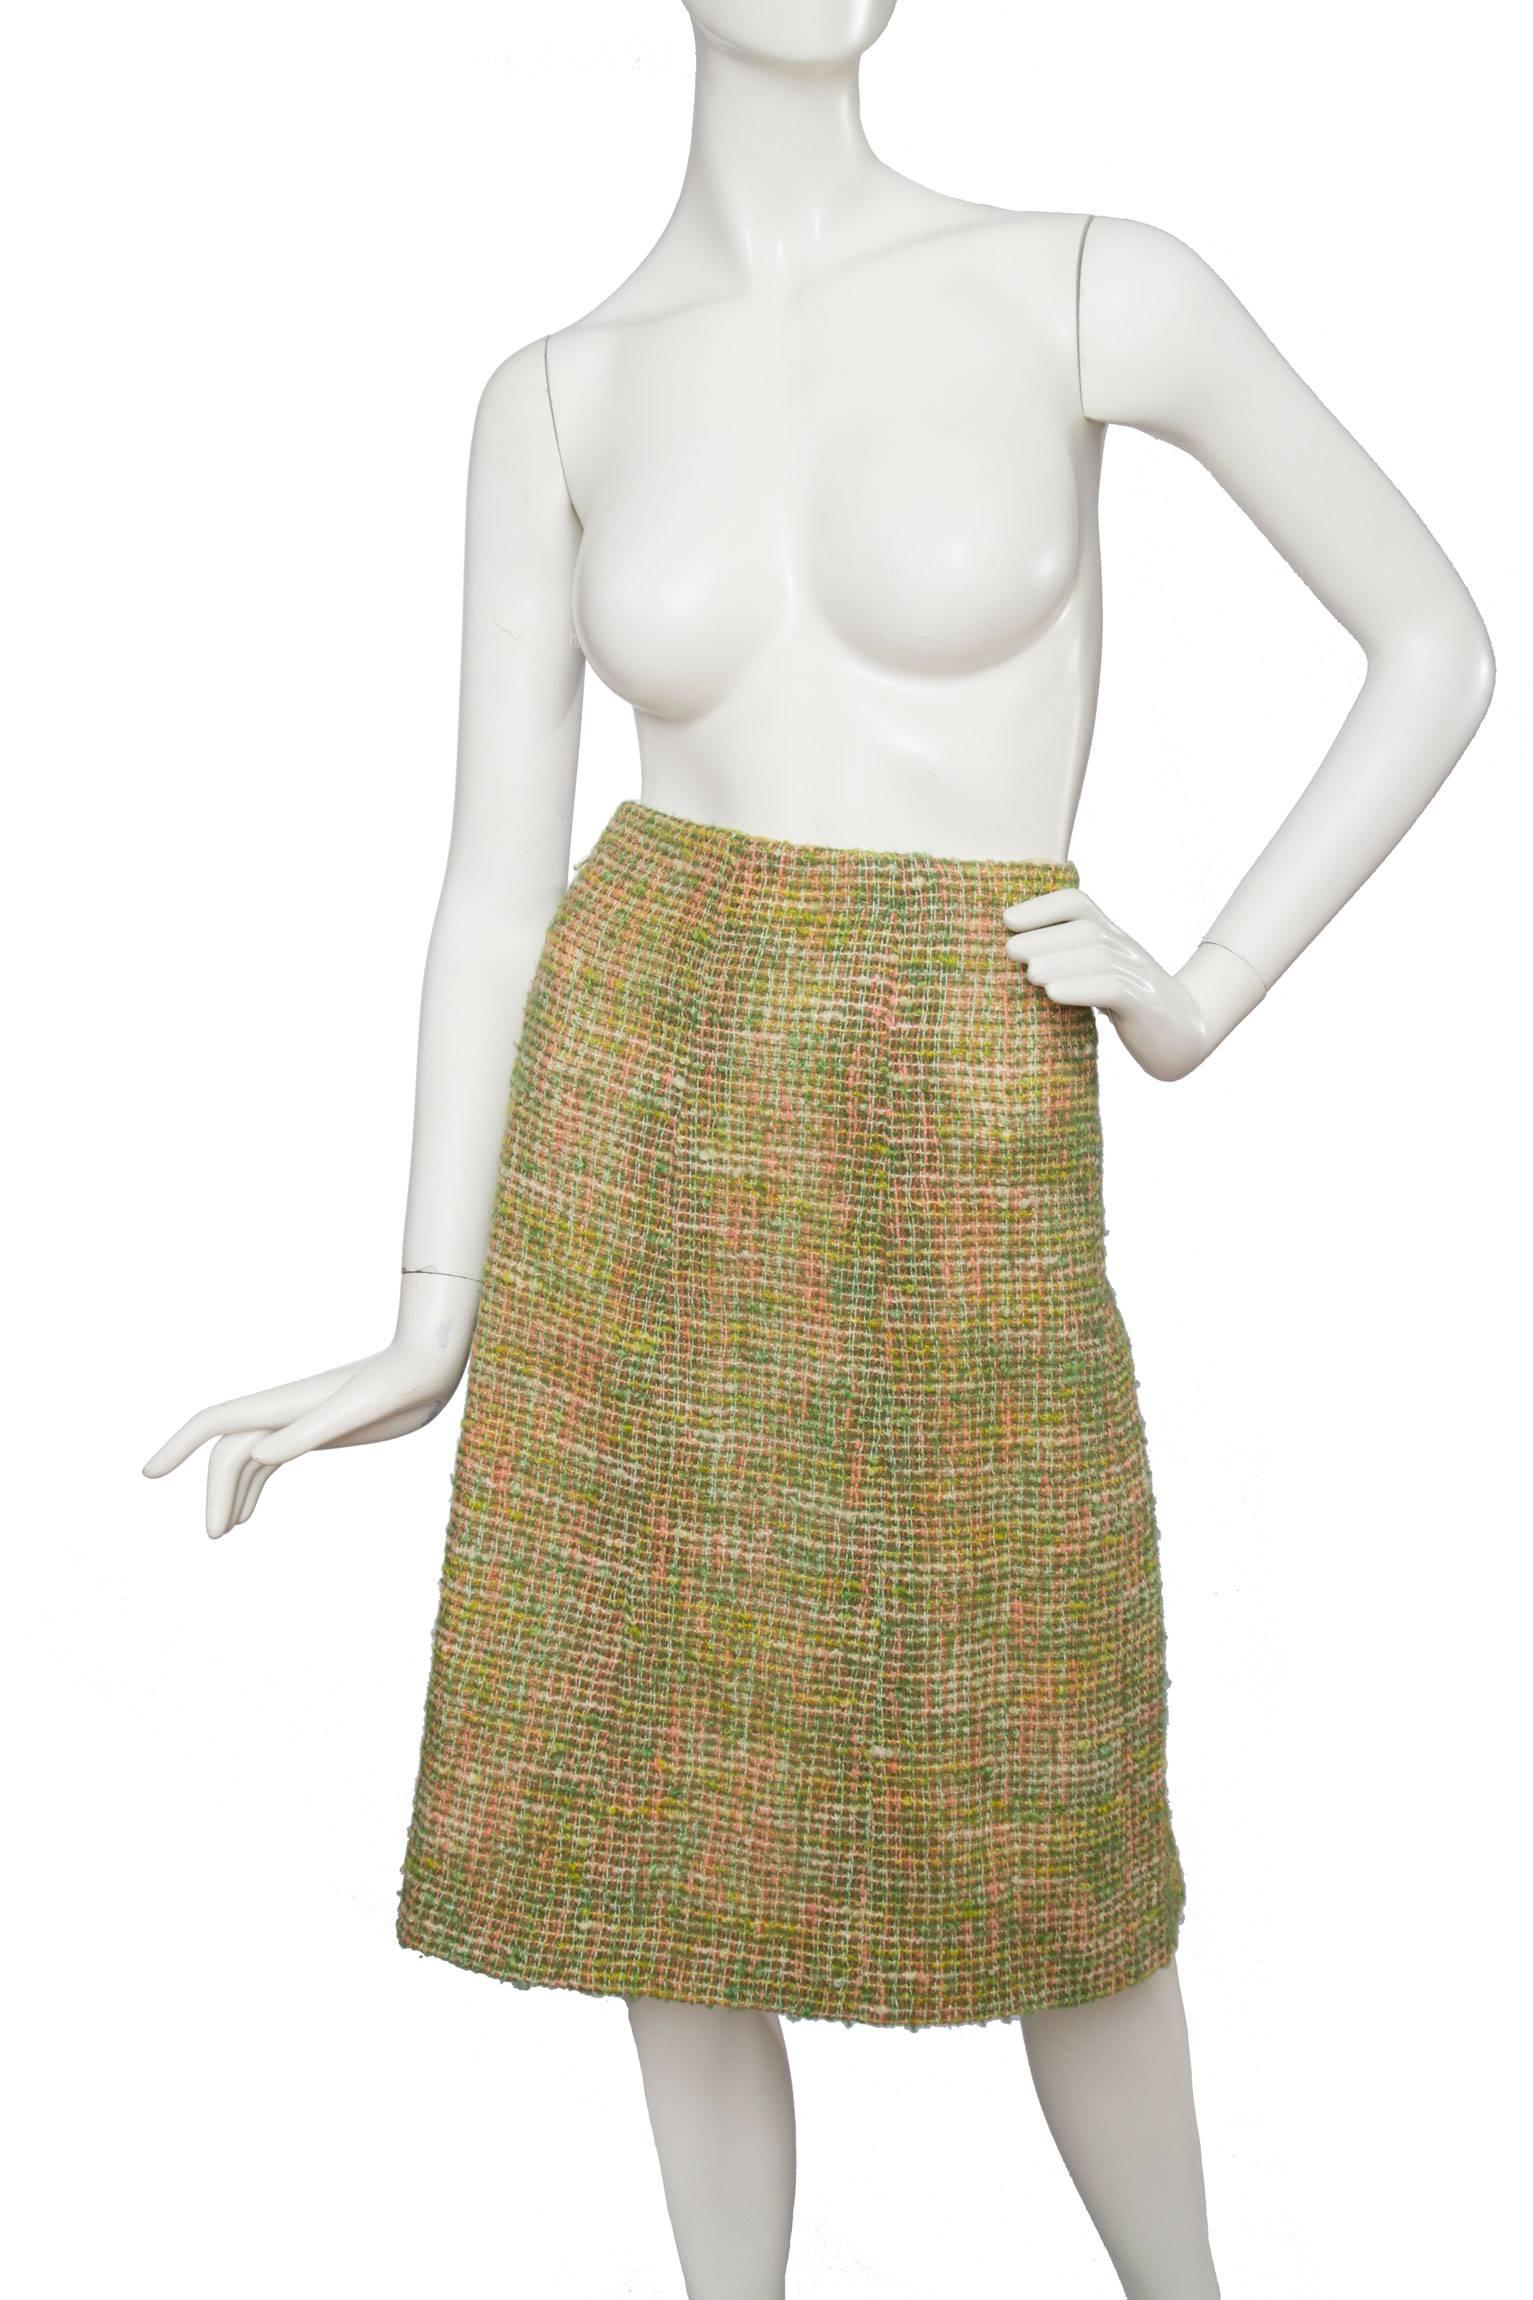 Women's 1960s Chanel Haute Couture Green & Pink Skirt Suit